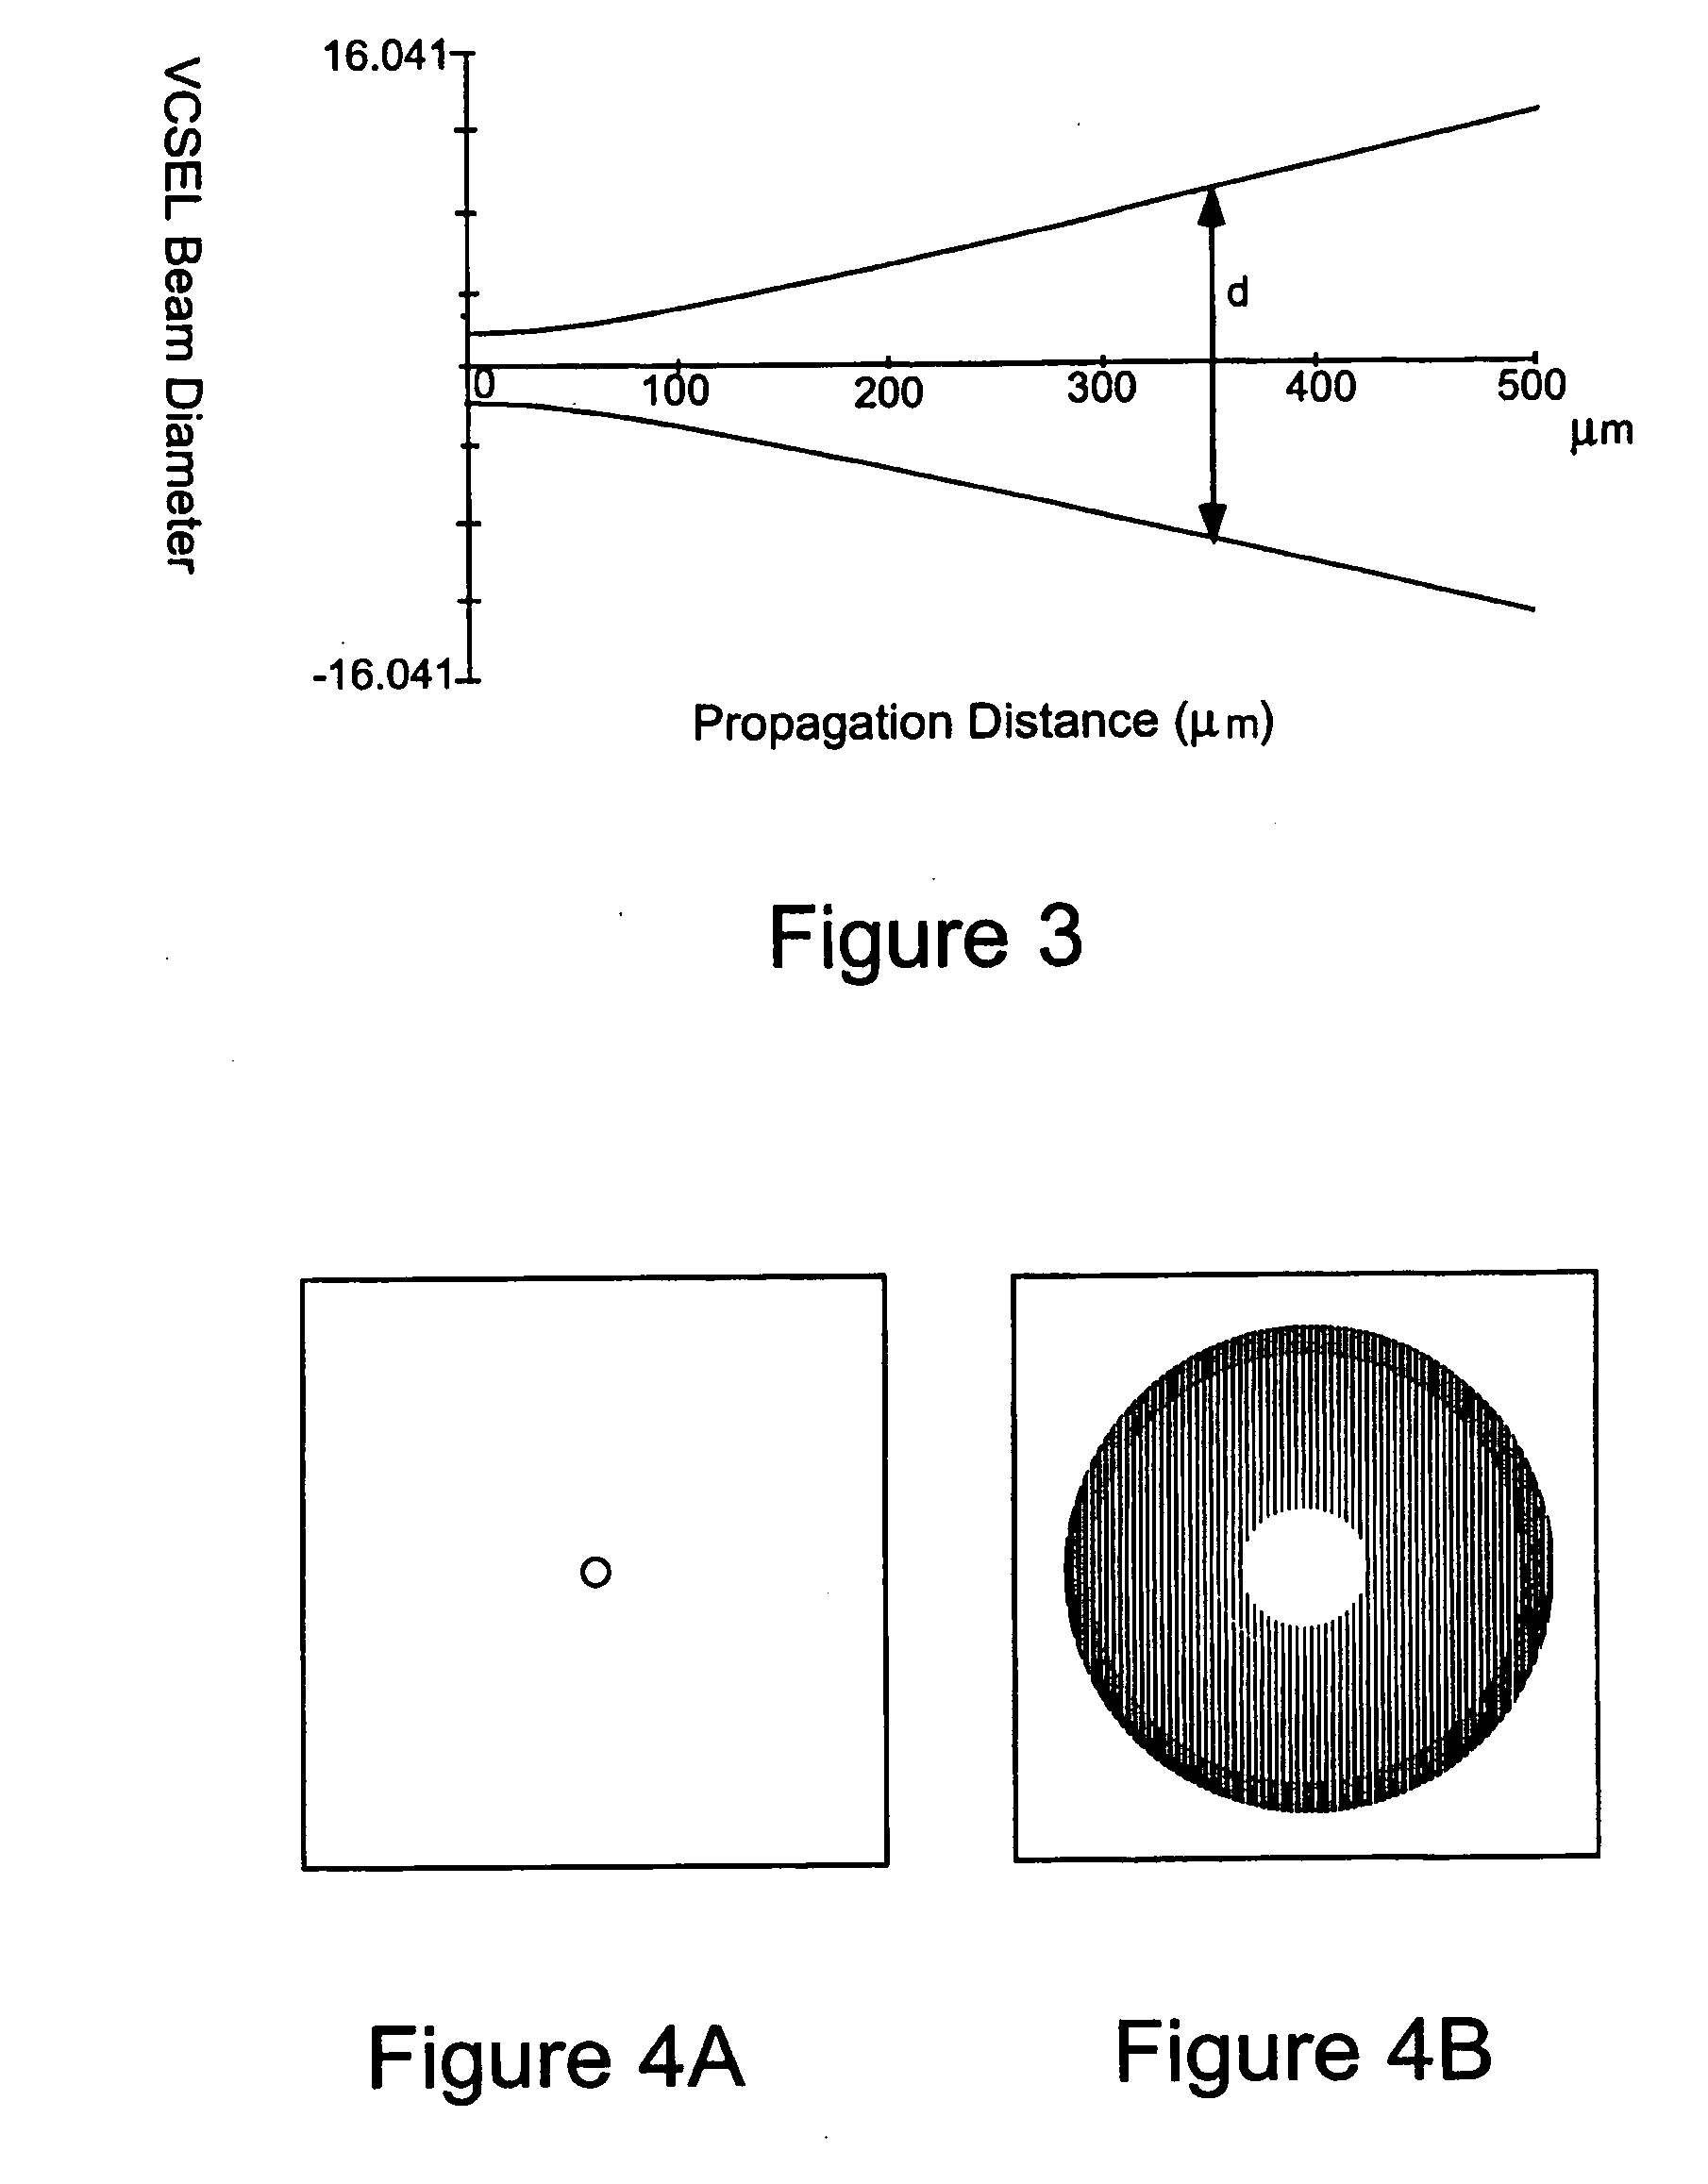 High throughput optical micro-array reader capable of variable pitch and spot size array processing for genomics and proteomics